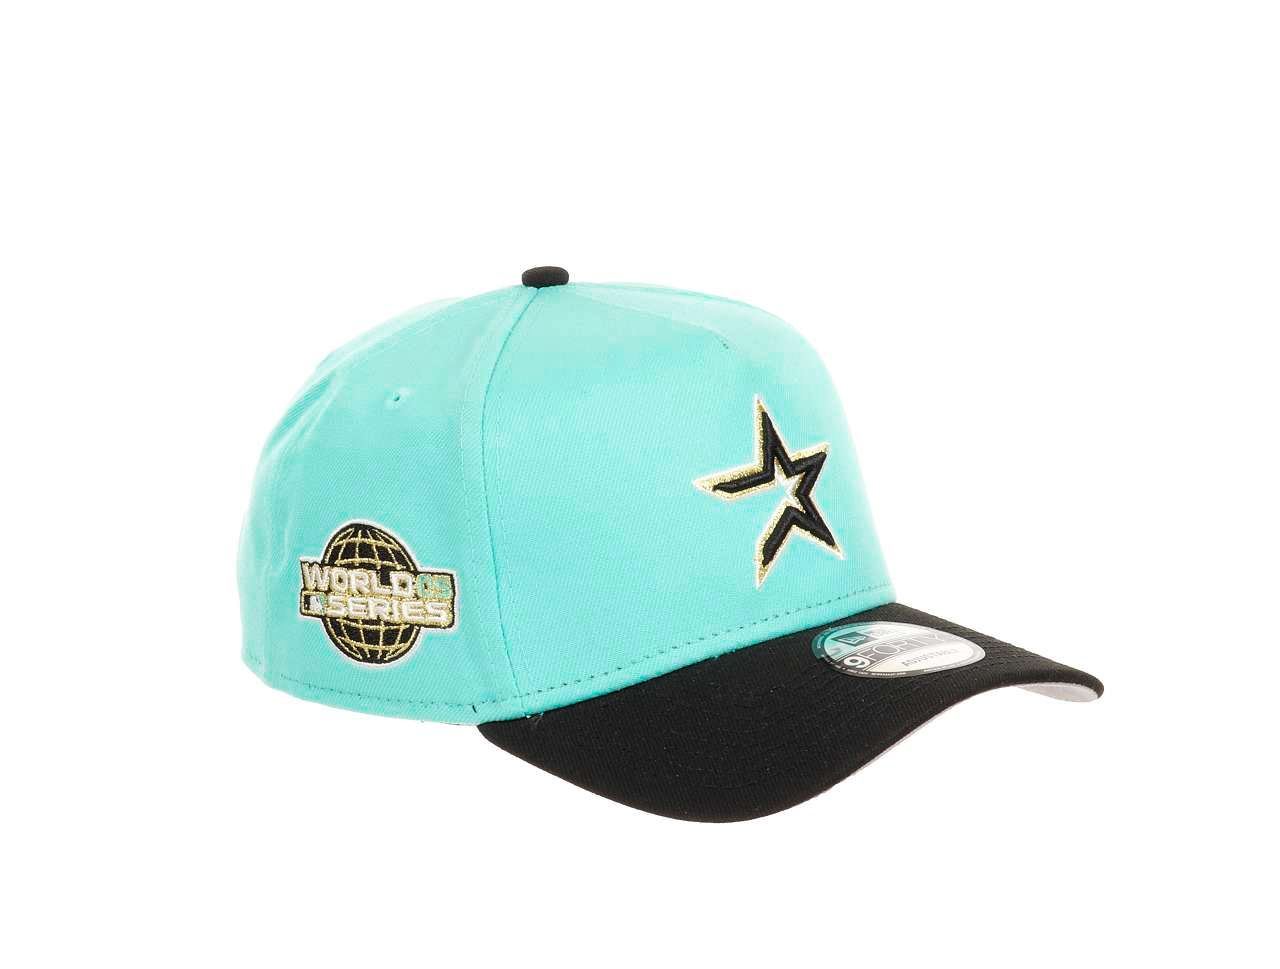 Houston Astros MLB World Series 2005 Sidepatch Cooperstown Mint Black 9Forty A-Frame Snapback Cap New Era